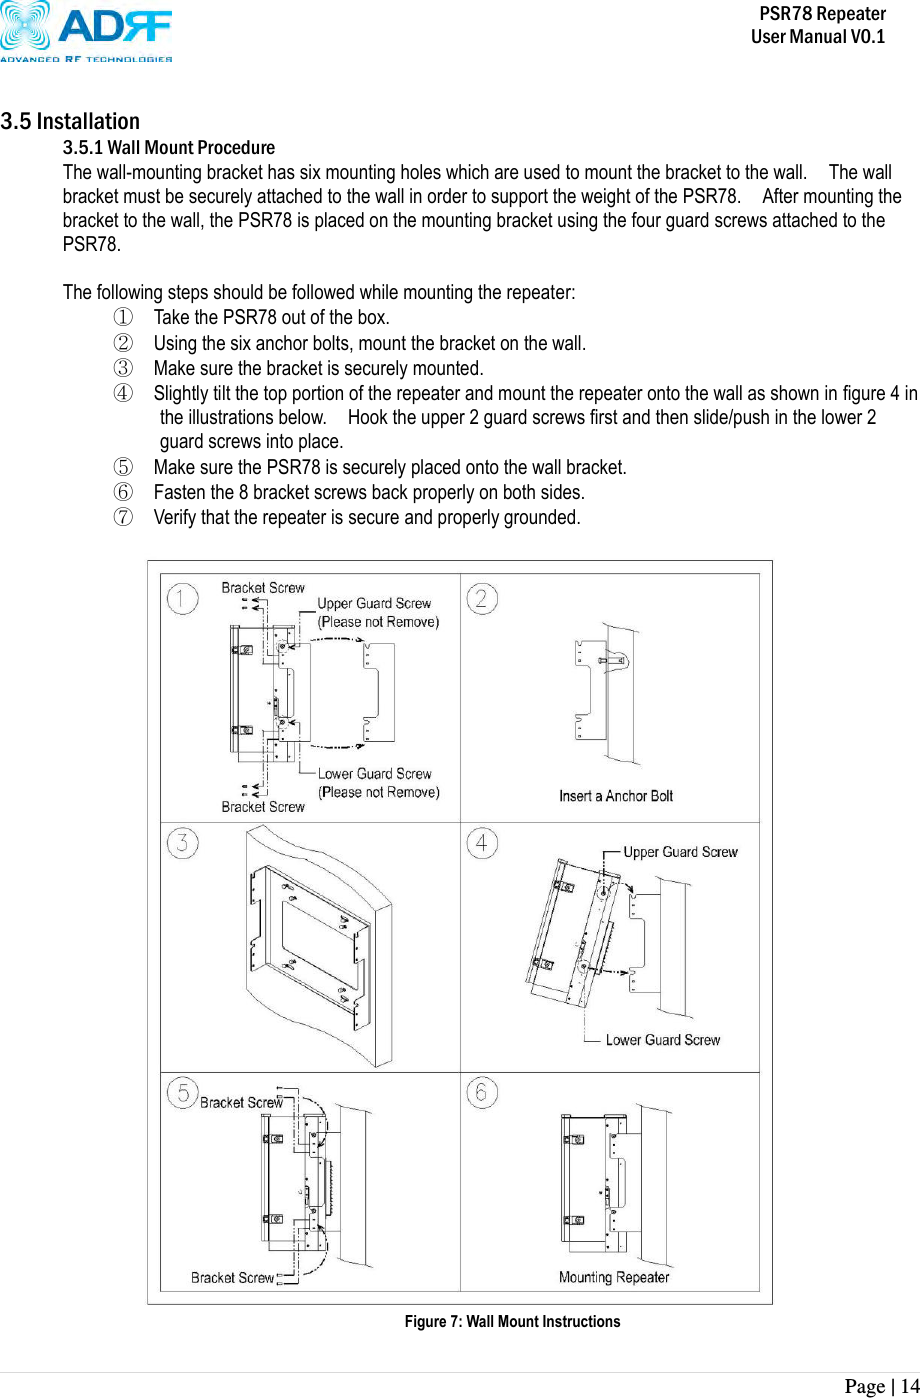           PSR78 Repeater     User Manual V0.1 Page | 14     3.5 Installation 3.5.1 Wall Mount Procedure The wall-mounting bracket has six mounting holes which are used to mount the bracket to the wall.    The wall bracket must be securely attached to the wall in order to support the weight of the PSR78.    After mounting the bracket to the wall, the PSR78 is placed on the mounting bracket using the four guard screws attached to the PSR78.    The following steps should be followed while mounting the repeater: ① Take the PSR78 out of the box. ② Using the six anchor bolts, mount the bracket on the wall. ③ Make sure the bracket is securely mounted. ④ Slightly tilt the top portion of the repeater and mount the repeater onto the wall as shown in figure 4 in the illustrations below.    Hook the upper 2 guard screws first and then slide/push in the lower 2 guard screws into place. ⑤ Make sure the PSR78 is securely placed onto the wall bracket. ⑥ Fasten the 8 bracket screws back properly on both sides. ⑦ Verify that the repeater is secure and properly grounded.   Figure 7: Wall Mount Instructions 